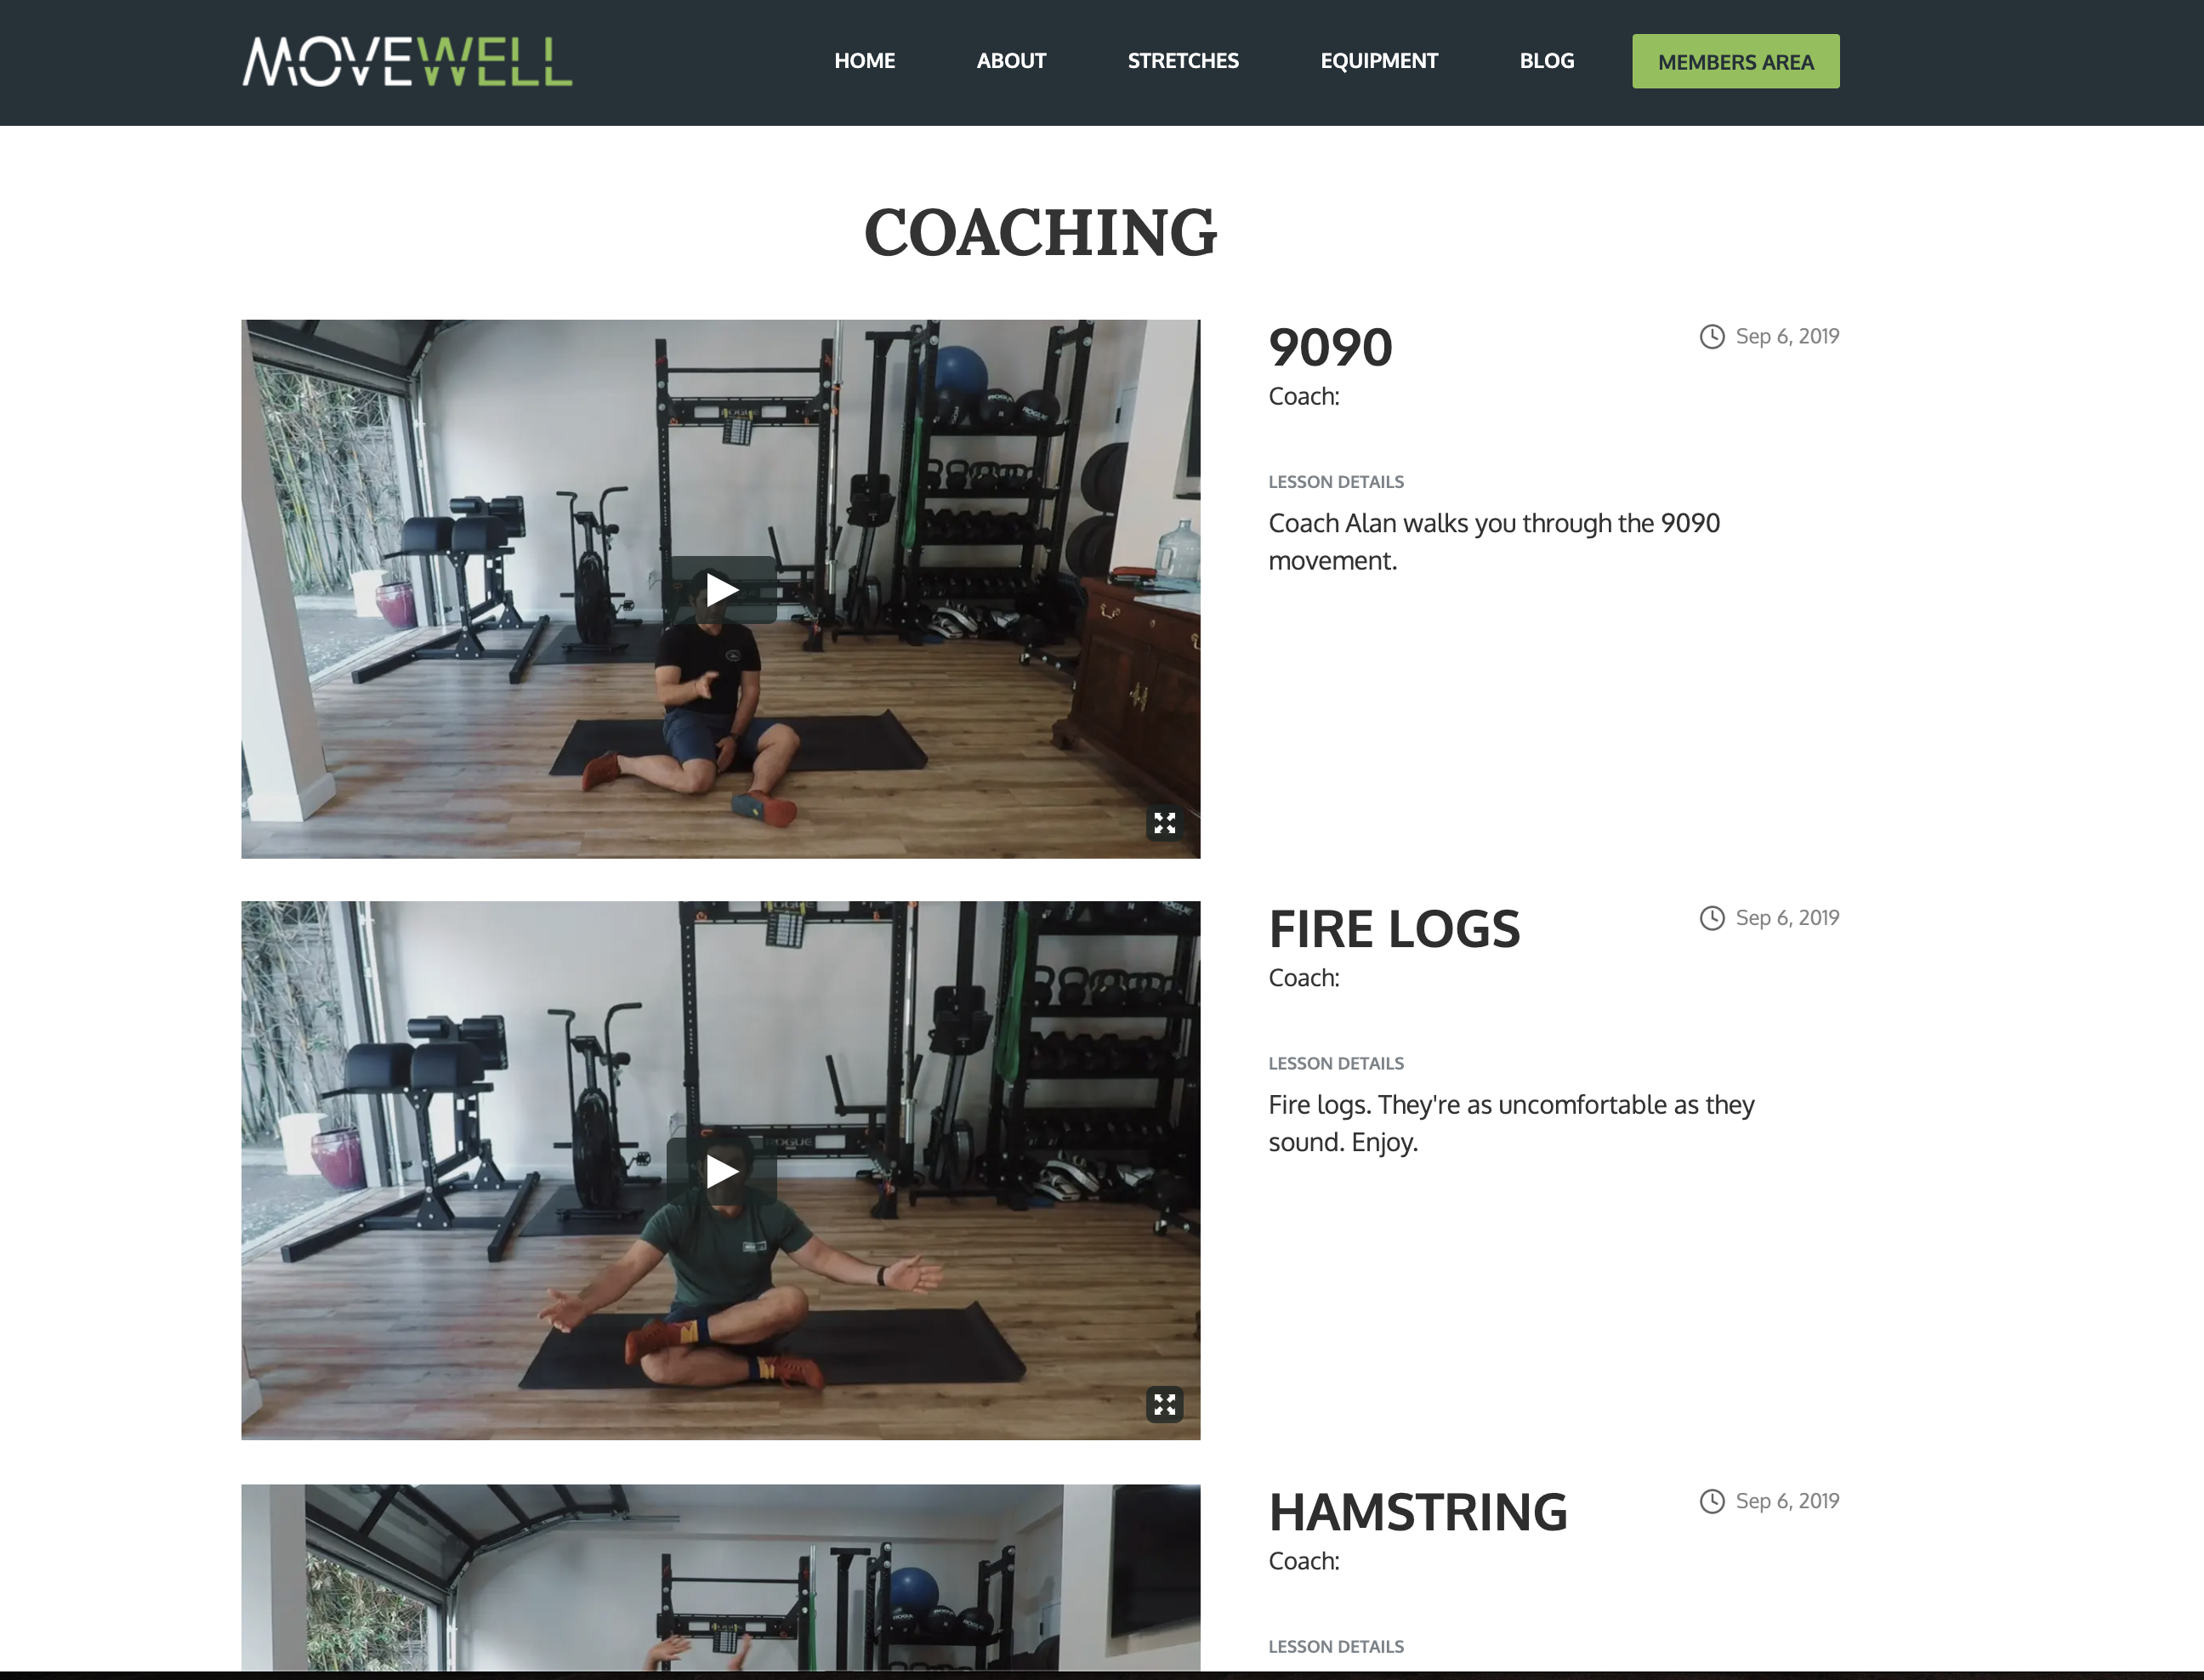 Know more about MoveWell